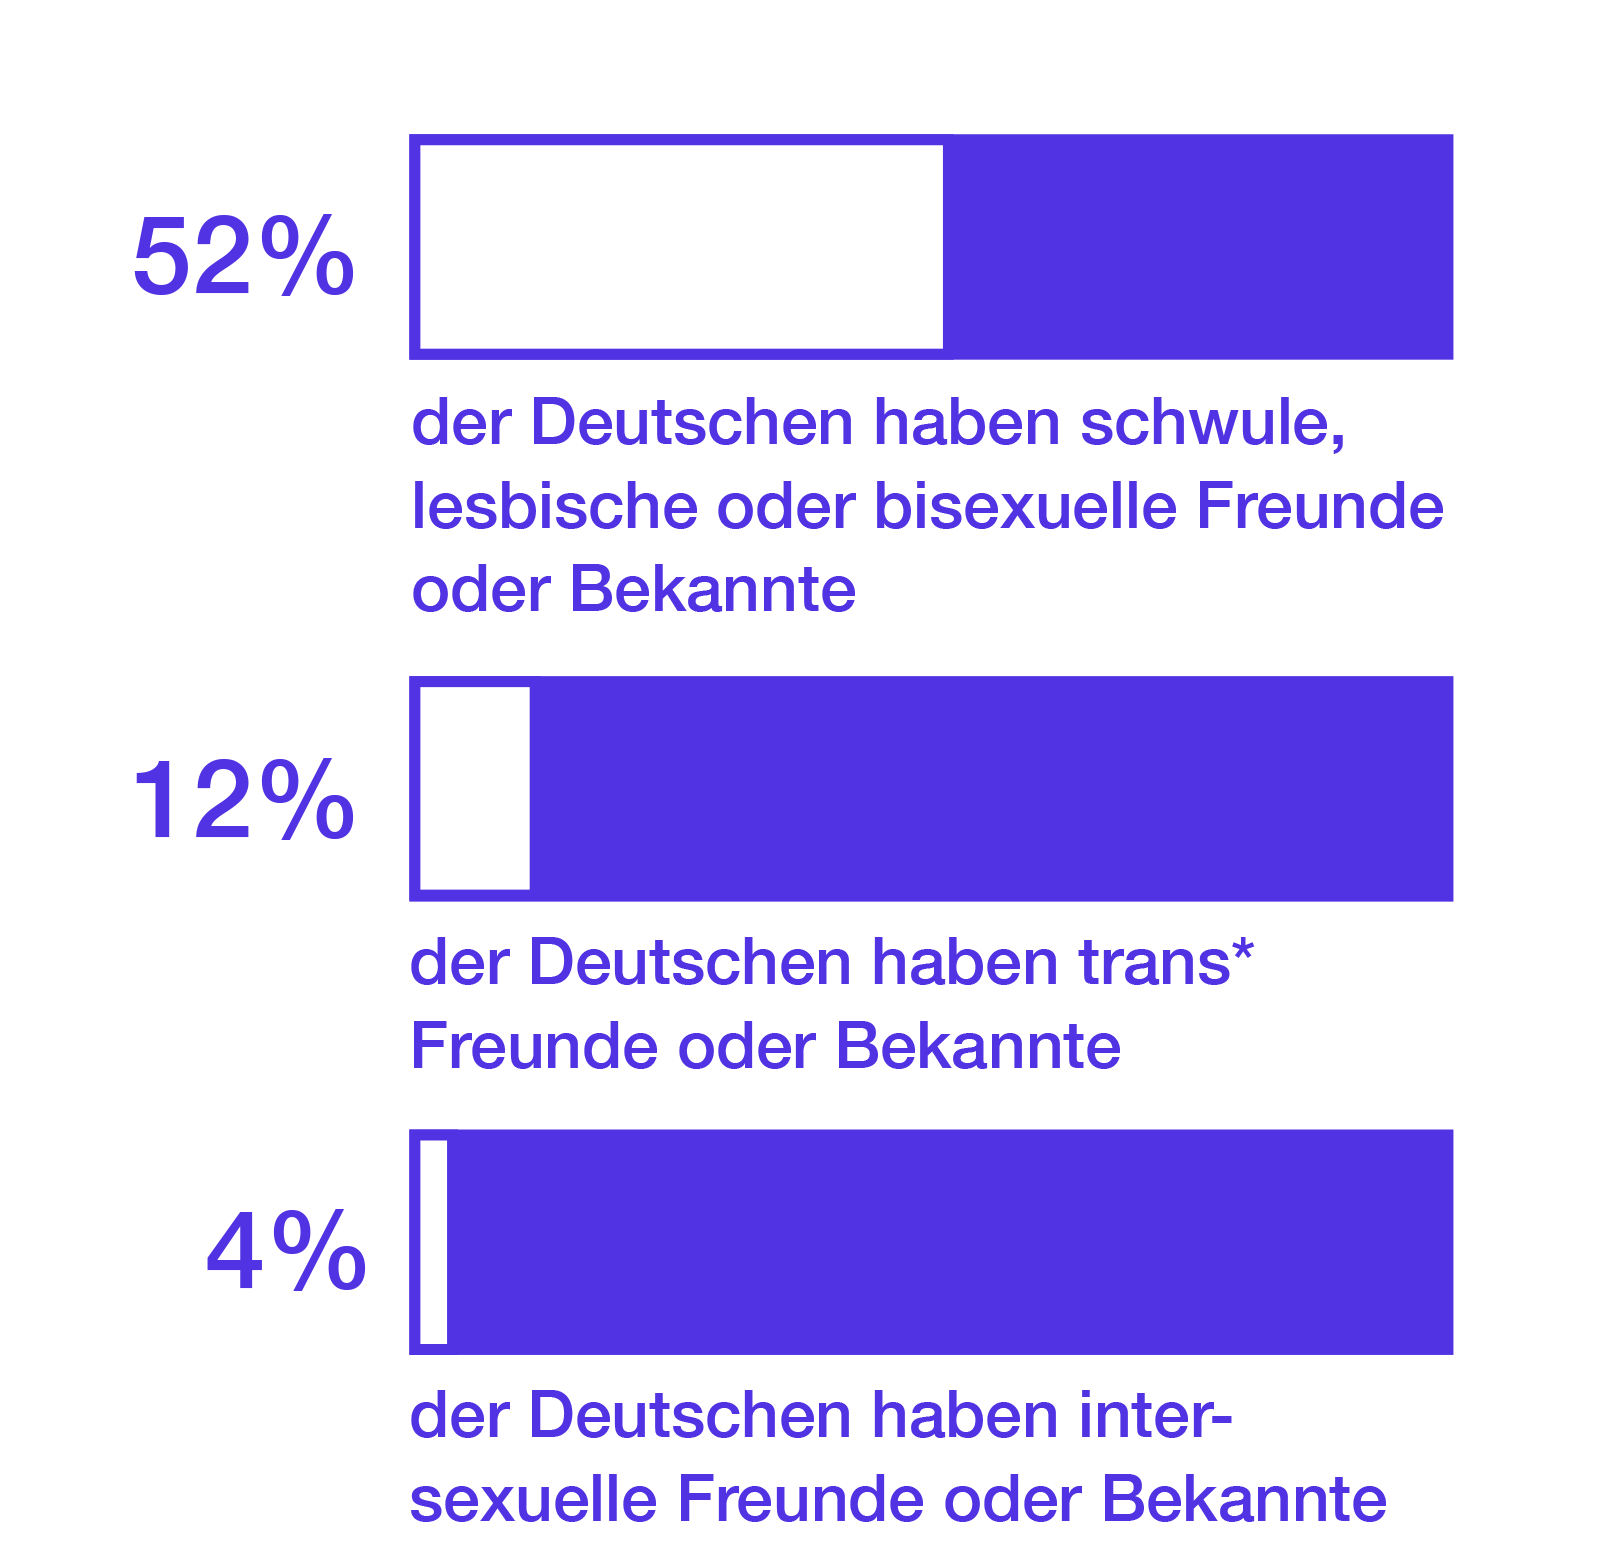 52% of Germans have gay, lesbian or bisexual friends or acquaintances. 12% of Germans have trans* friends or acquaintances. 4% of Germans have intersex friends or acquaintances.